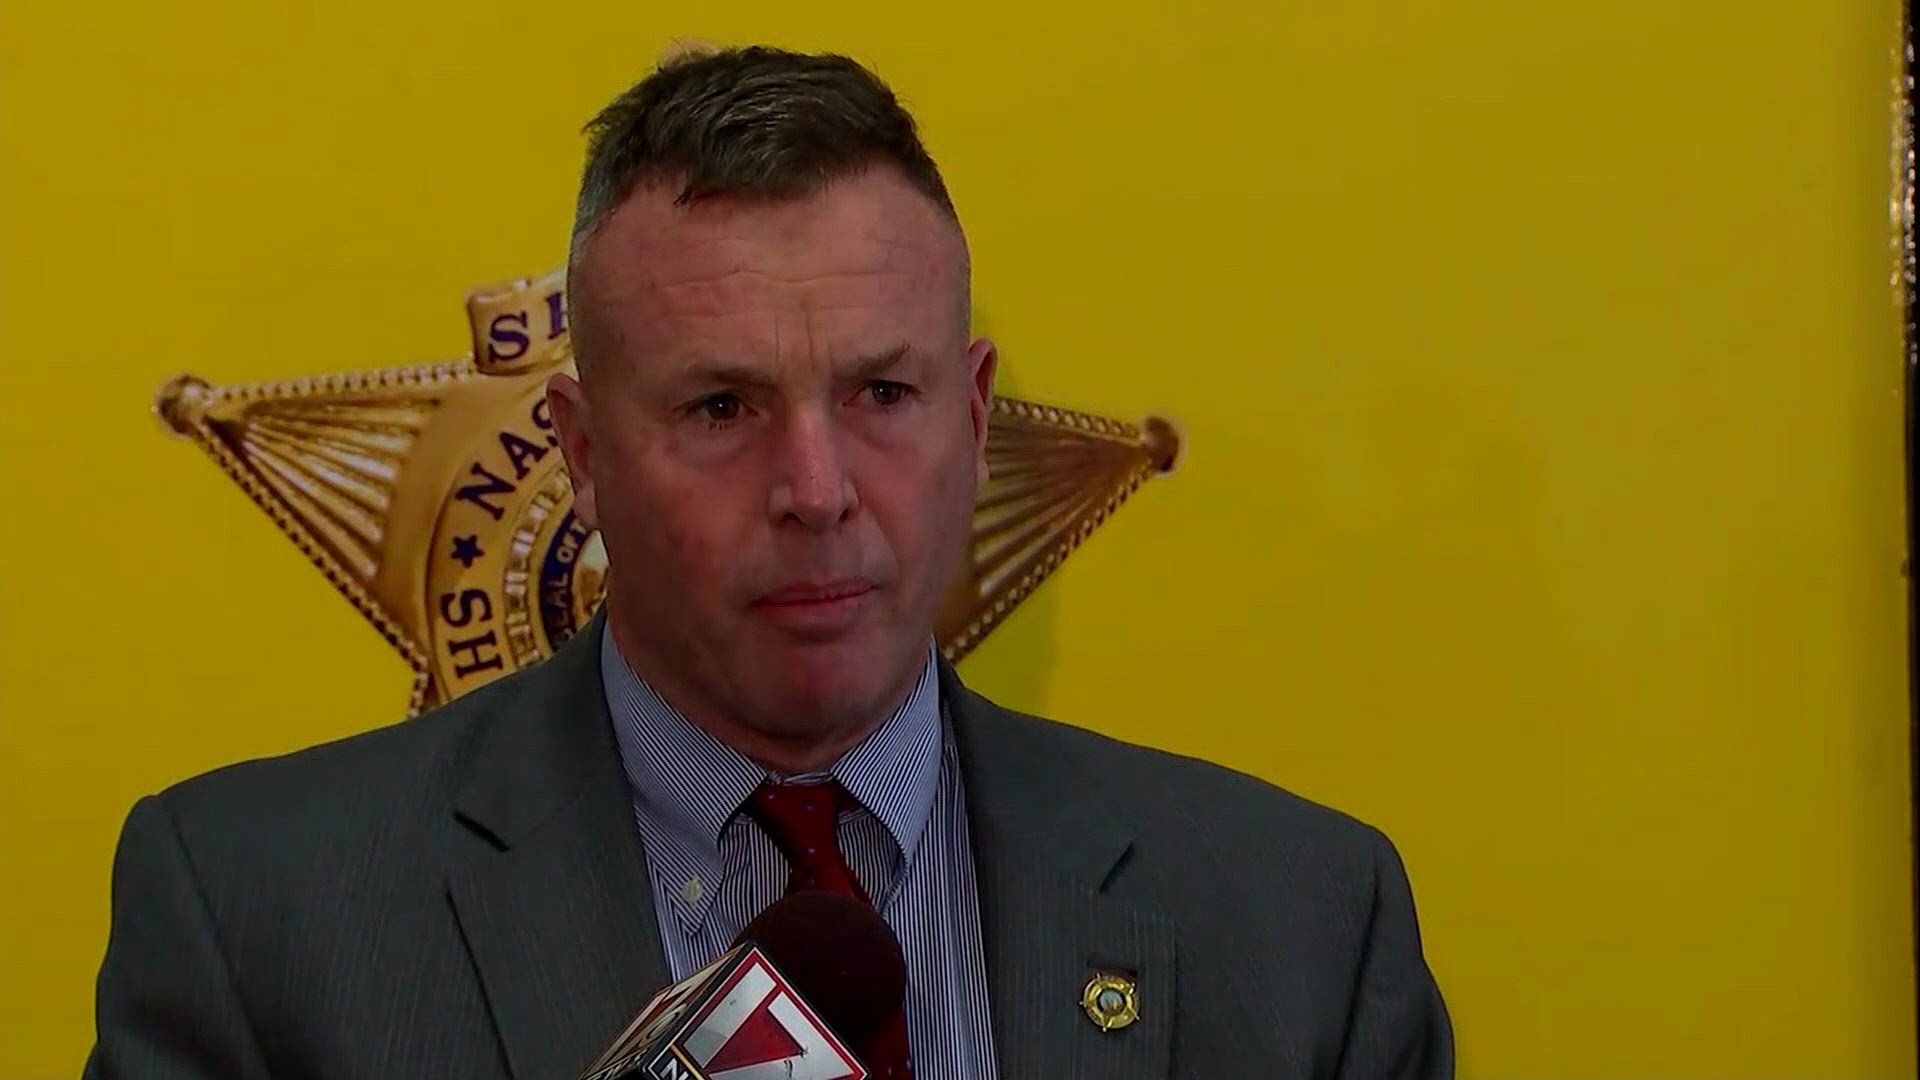 Nash County Sheriff Keith Stone held a news conference on Friday at about the same time that Lynn Keep was walked into the Nash County Sheriff's Office.